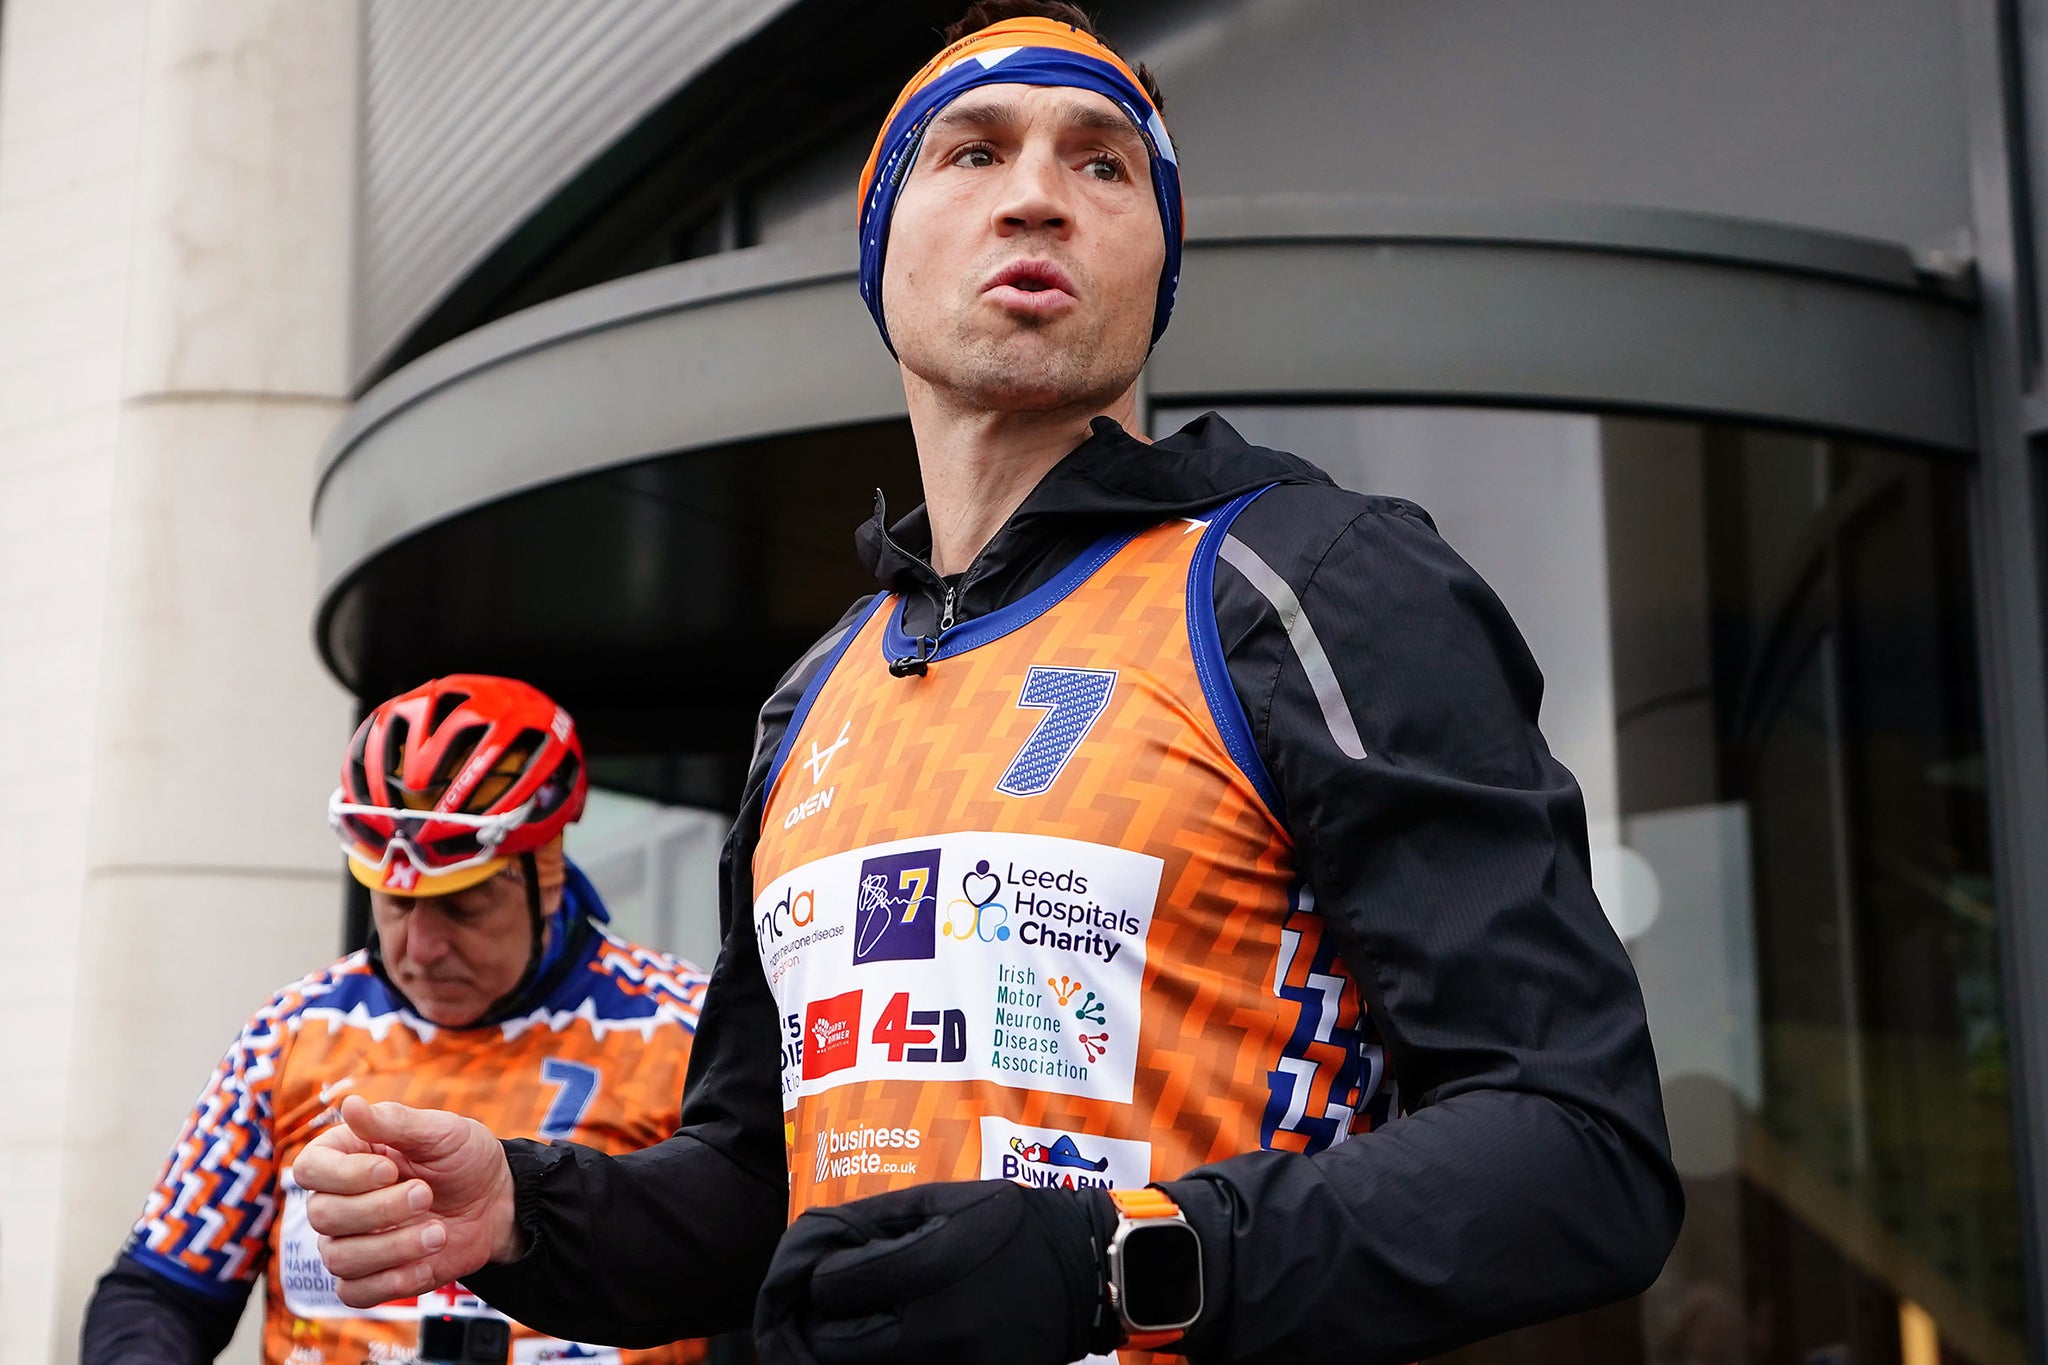 Keep on running: it was acceptable to talk about Kevin Sinfield being encouraged by the ‘loved ones’ of people with motor neurone disease as he completed a series of fundraising marathons